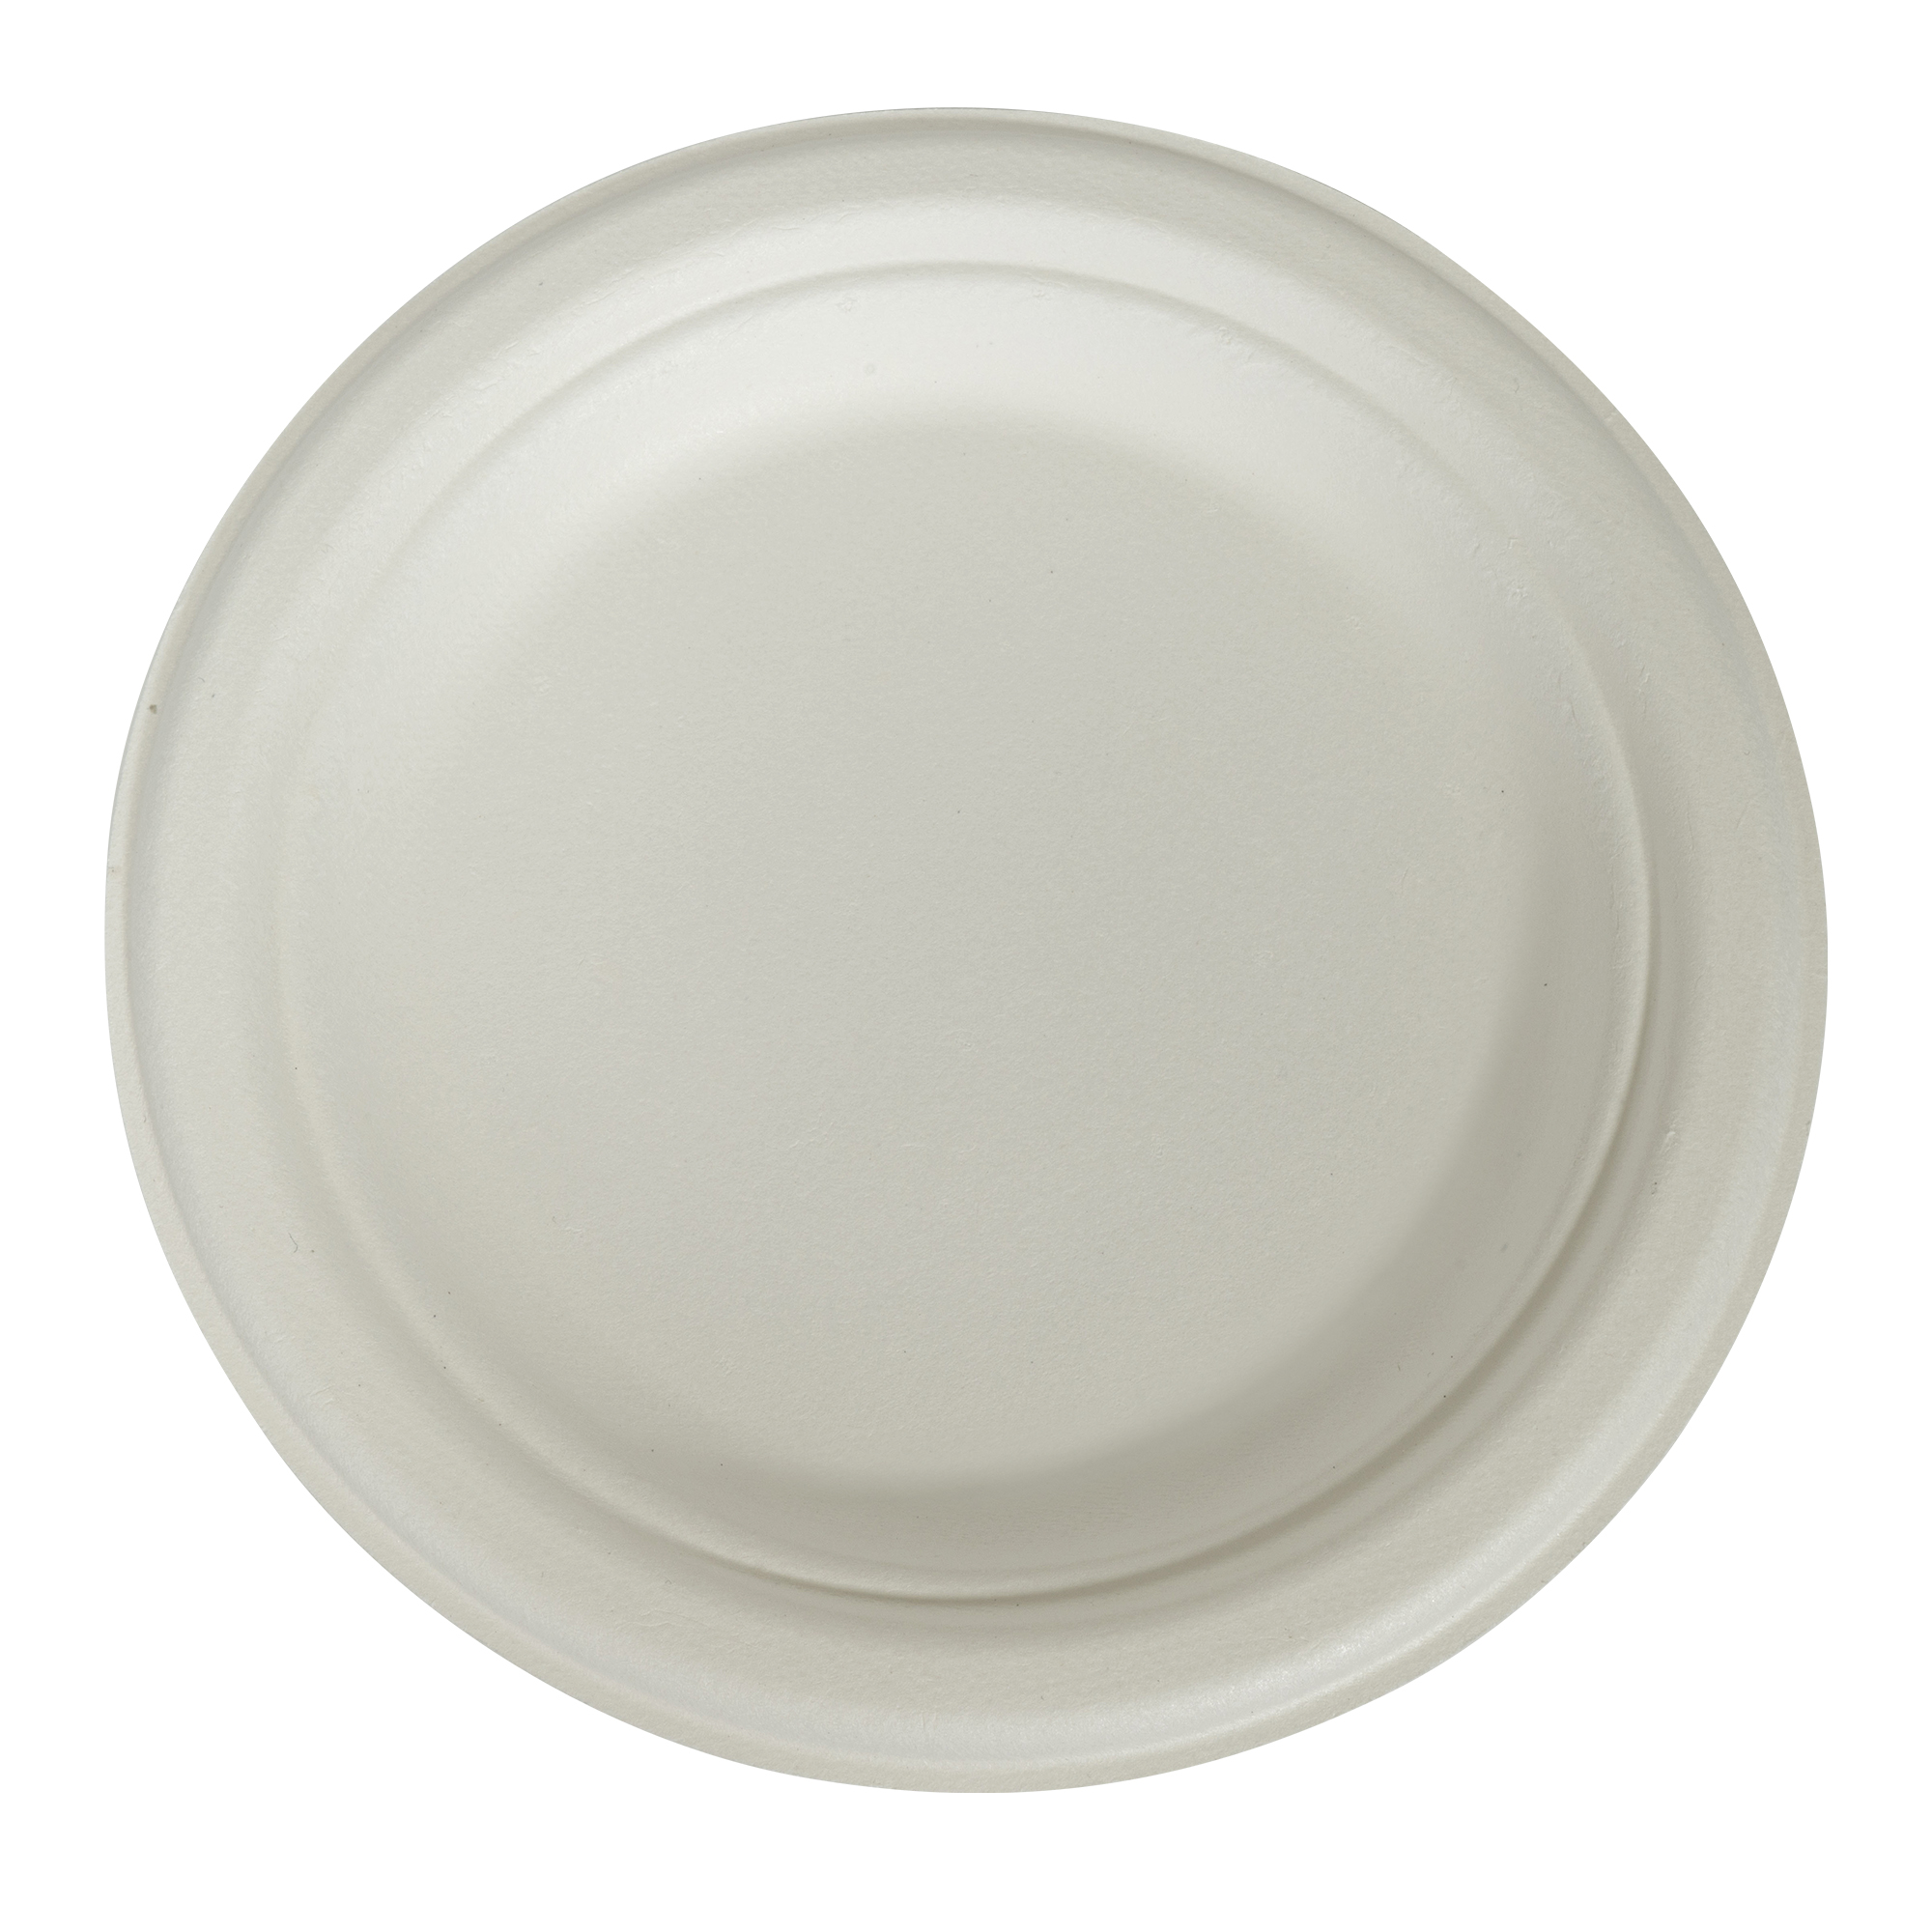 Round Compostable Fiber Plate 9" 125pc/pack - White